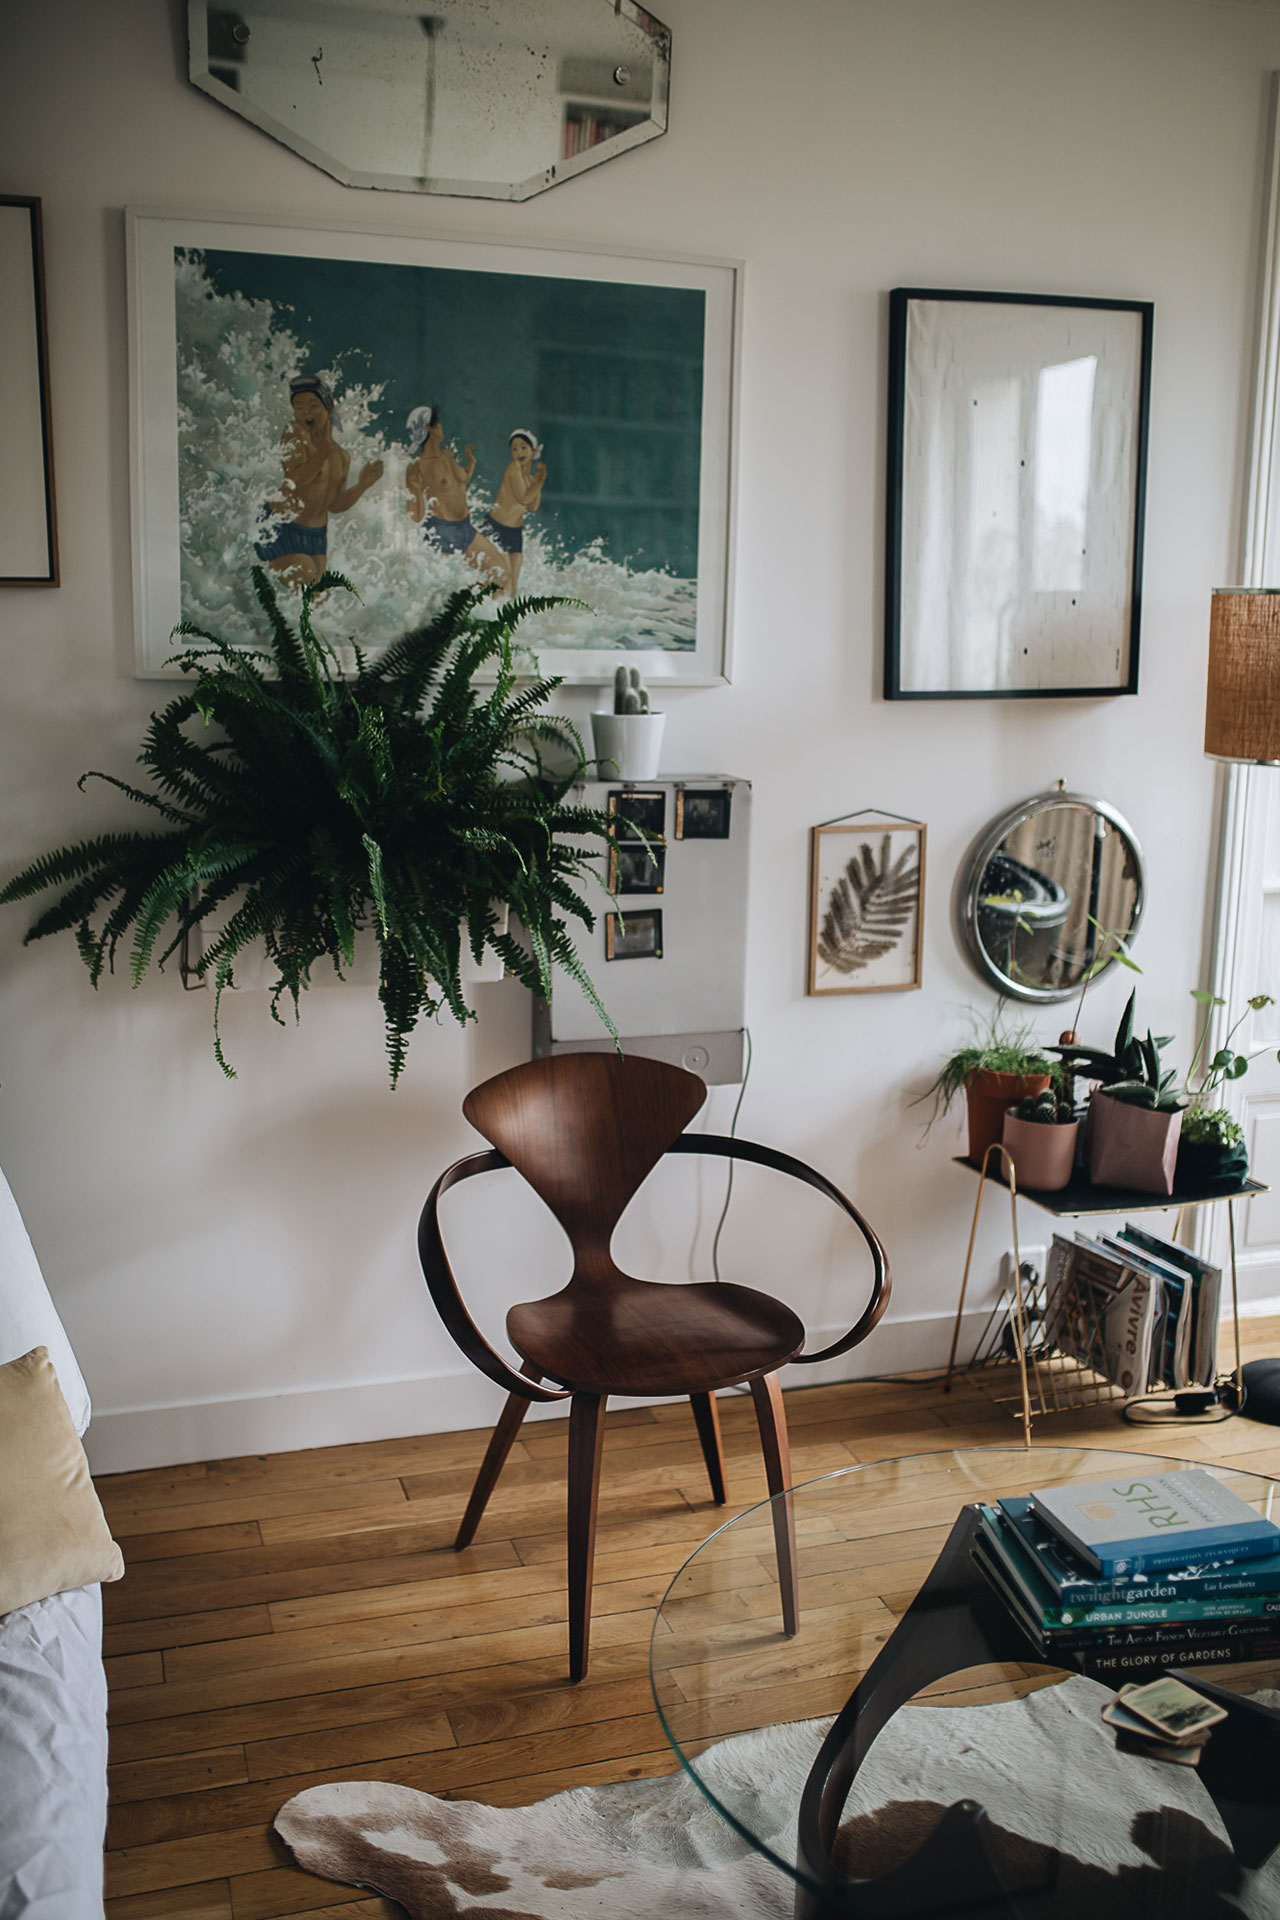 PLANT TRIBE LIVING HAPPILY EVER AFTER WITH PLANTSBy Igor Josifovic &amp; Judith de Graaff
Photo: The home of Rebecca Breach In Paris.Photography by Jules Villbrandt for Urban Jungle Bloggers.